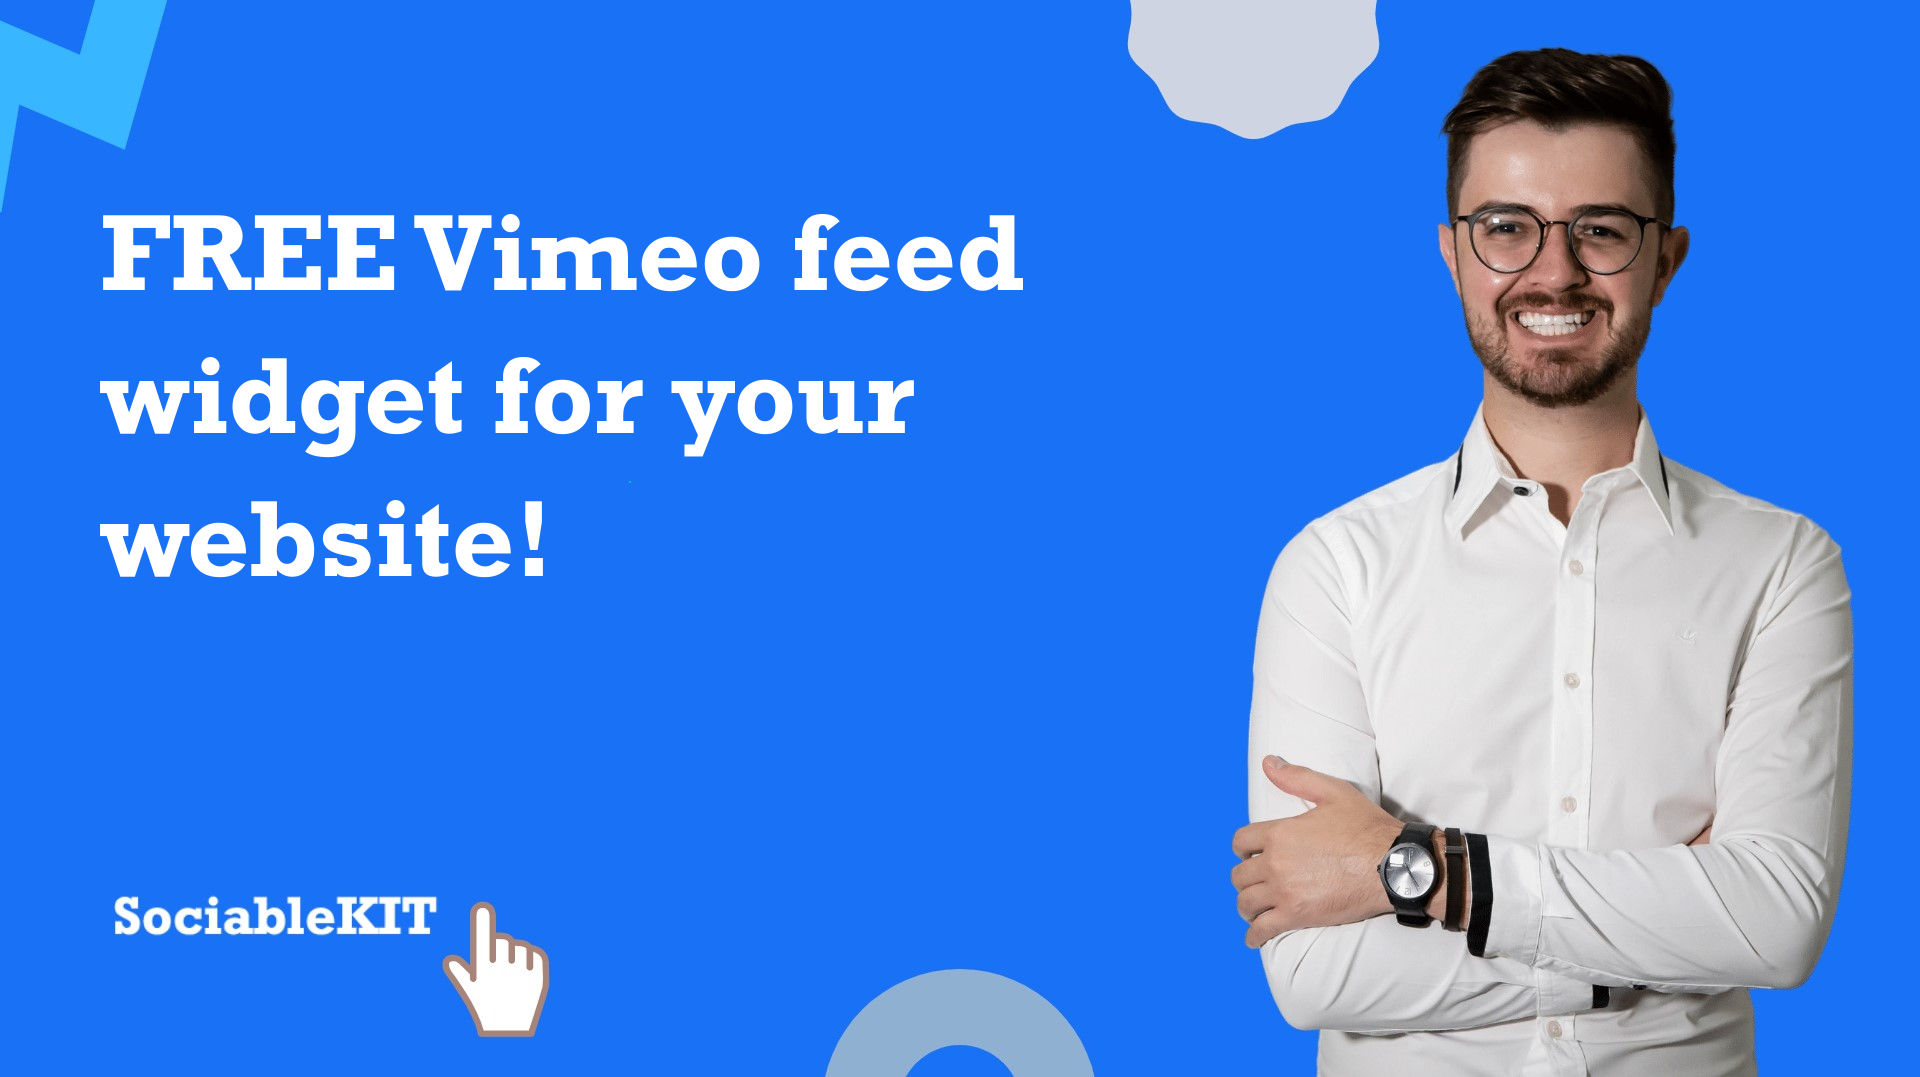 Free Vimeo feed widget for your website